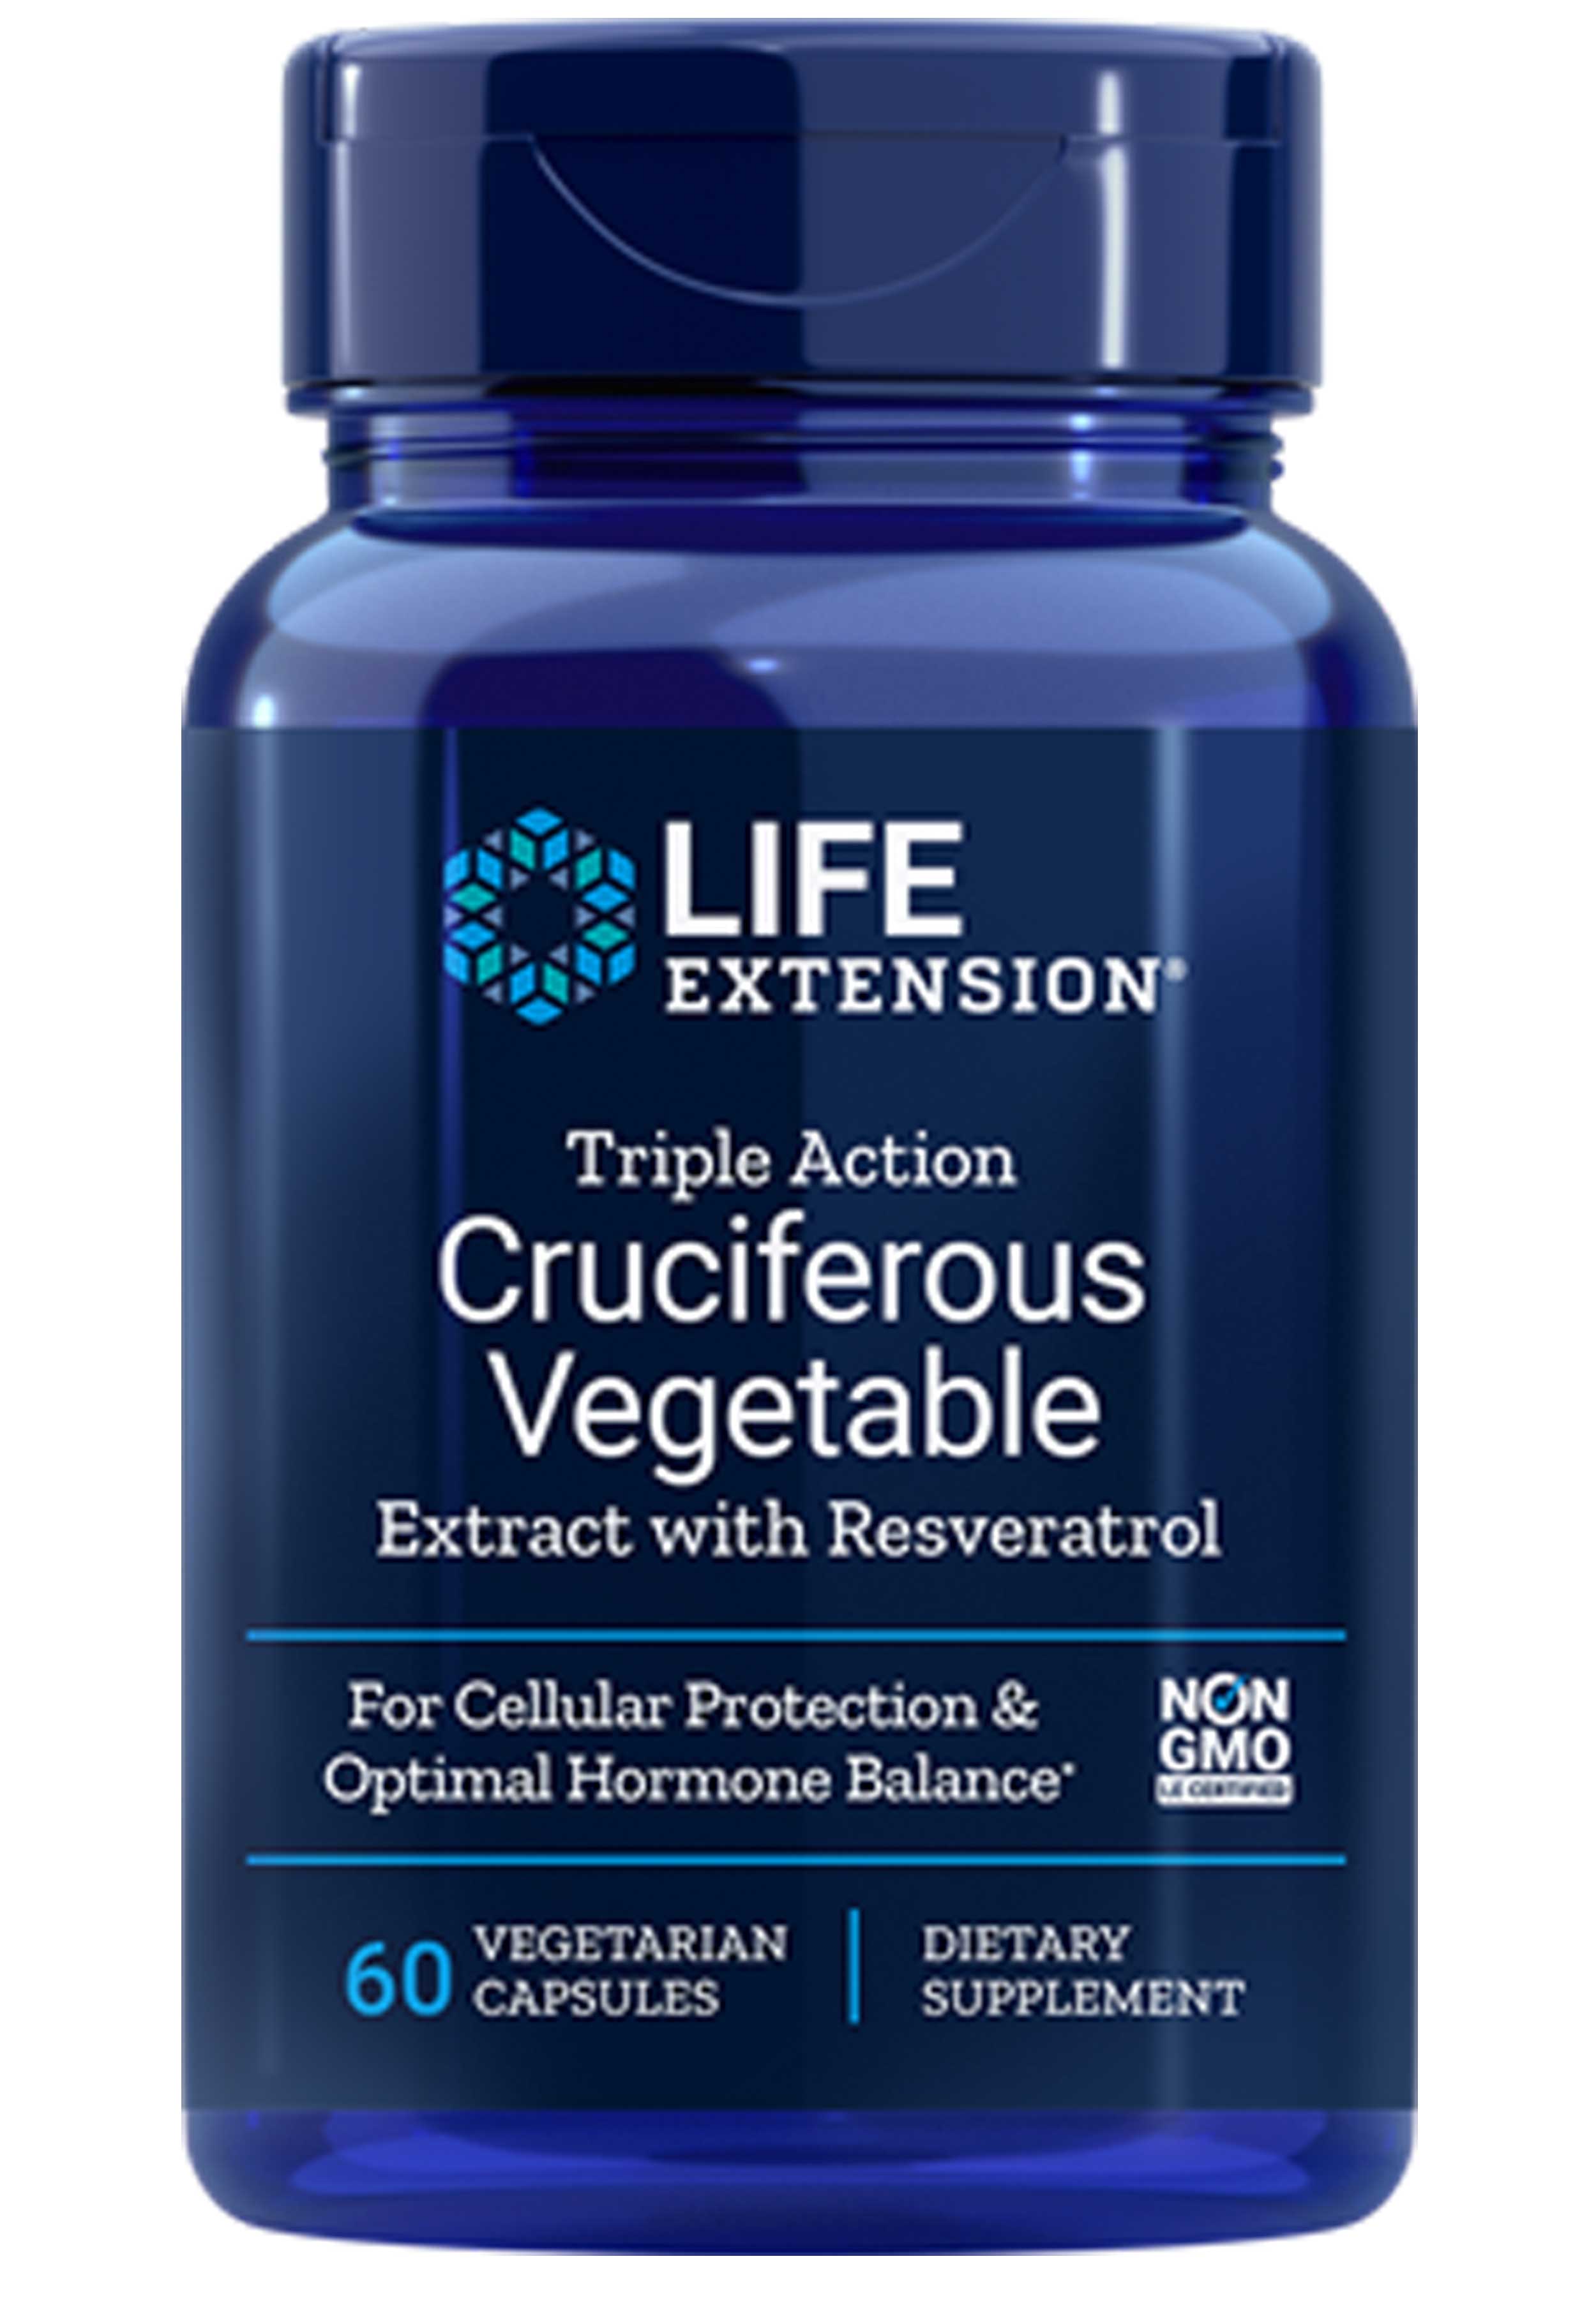 Life Extension Triple Action Cruciferous Vegetable Extract with Resveratrol